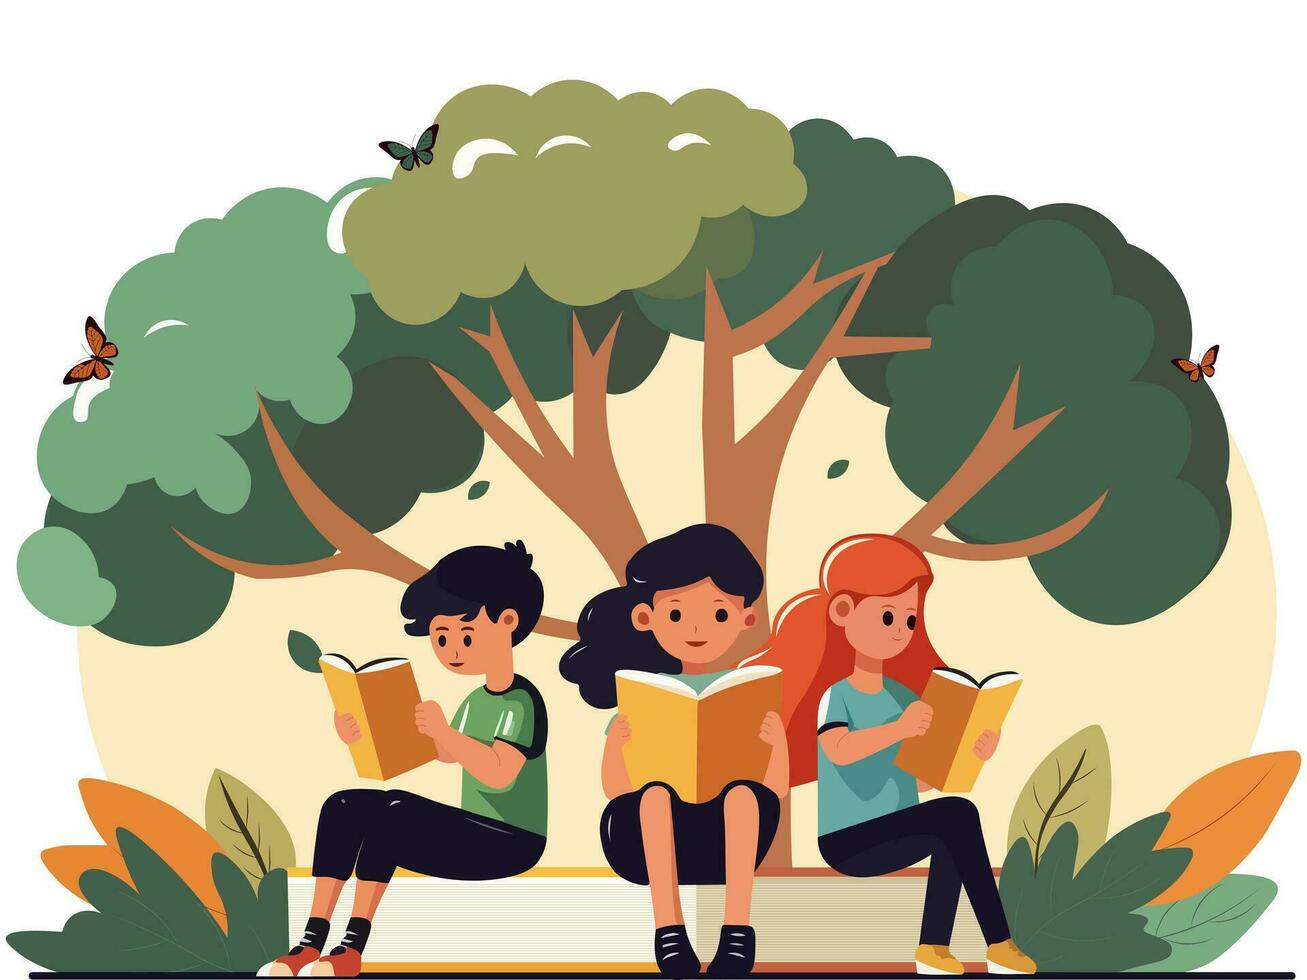 Children Characters Reading Books Under The Tree And Butterflies In Nature View. vector